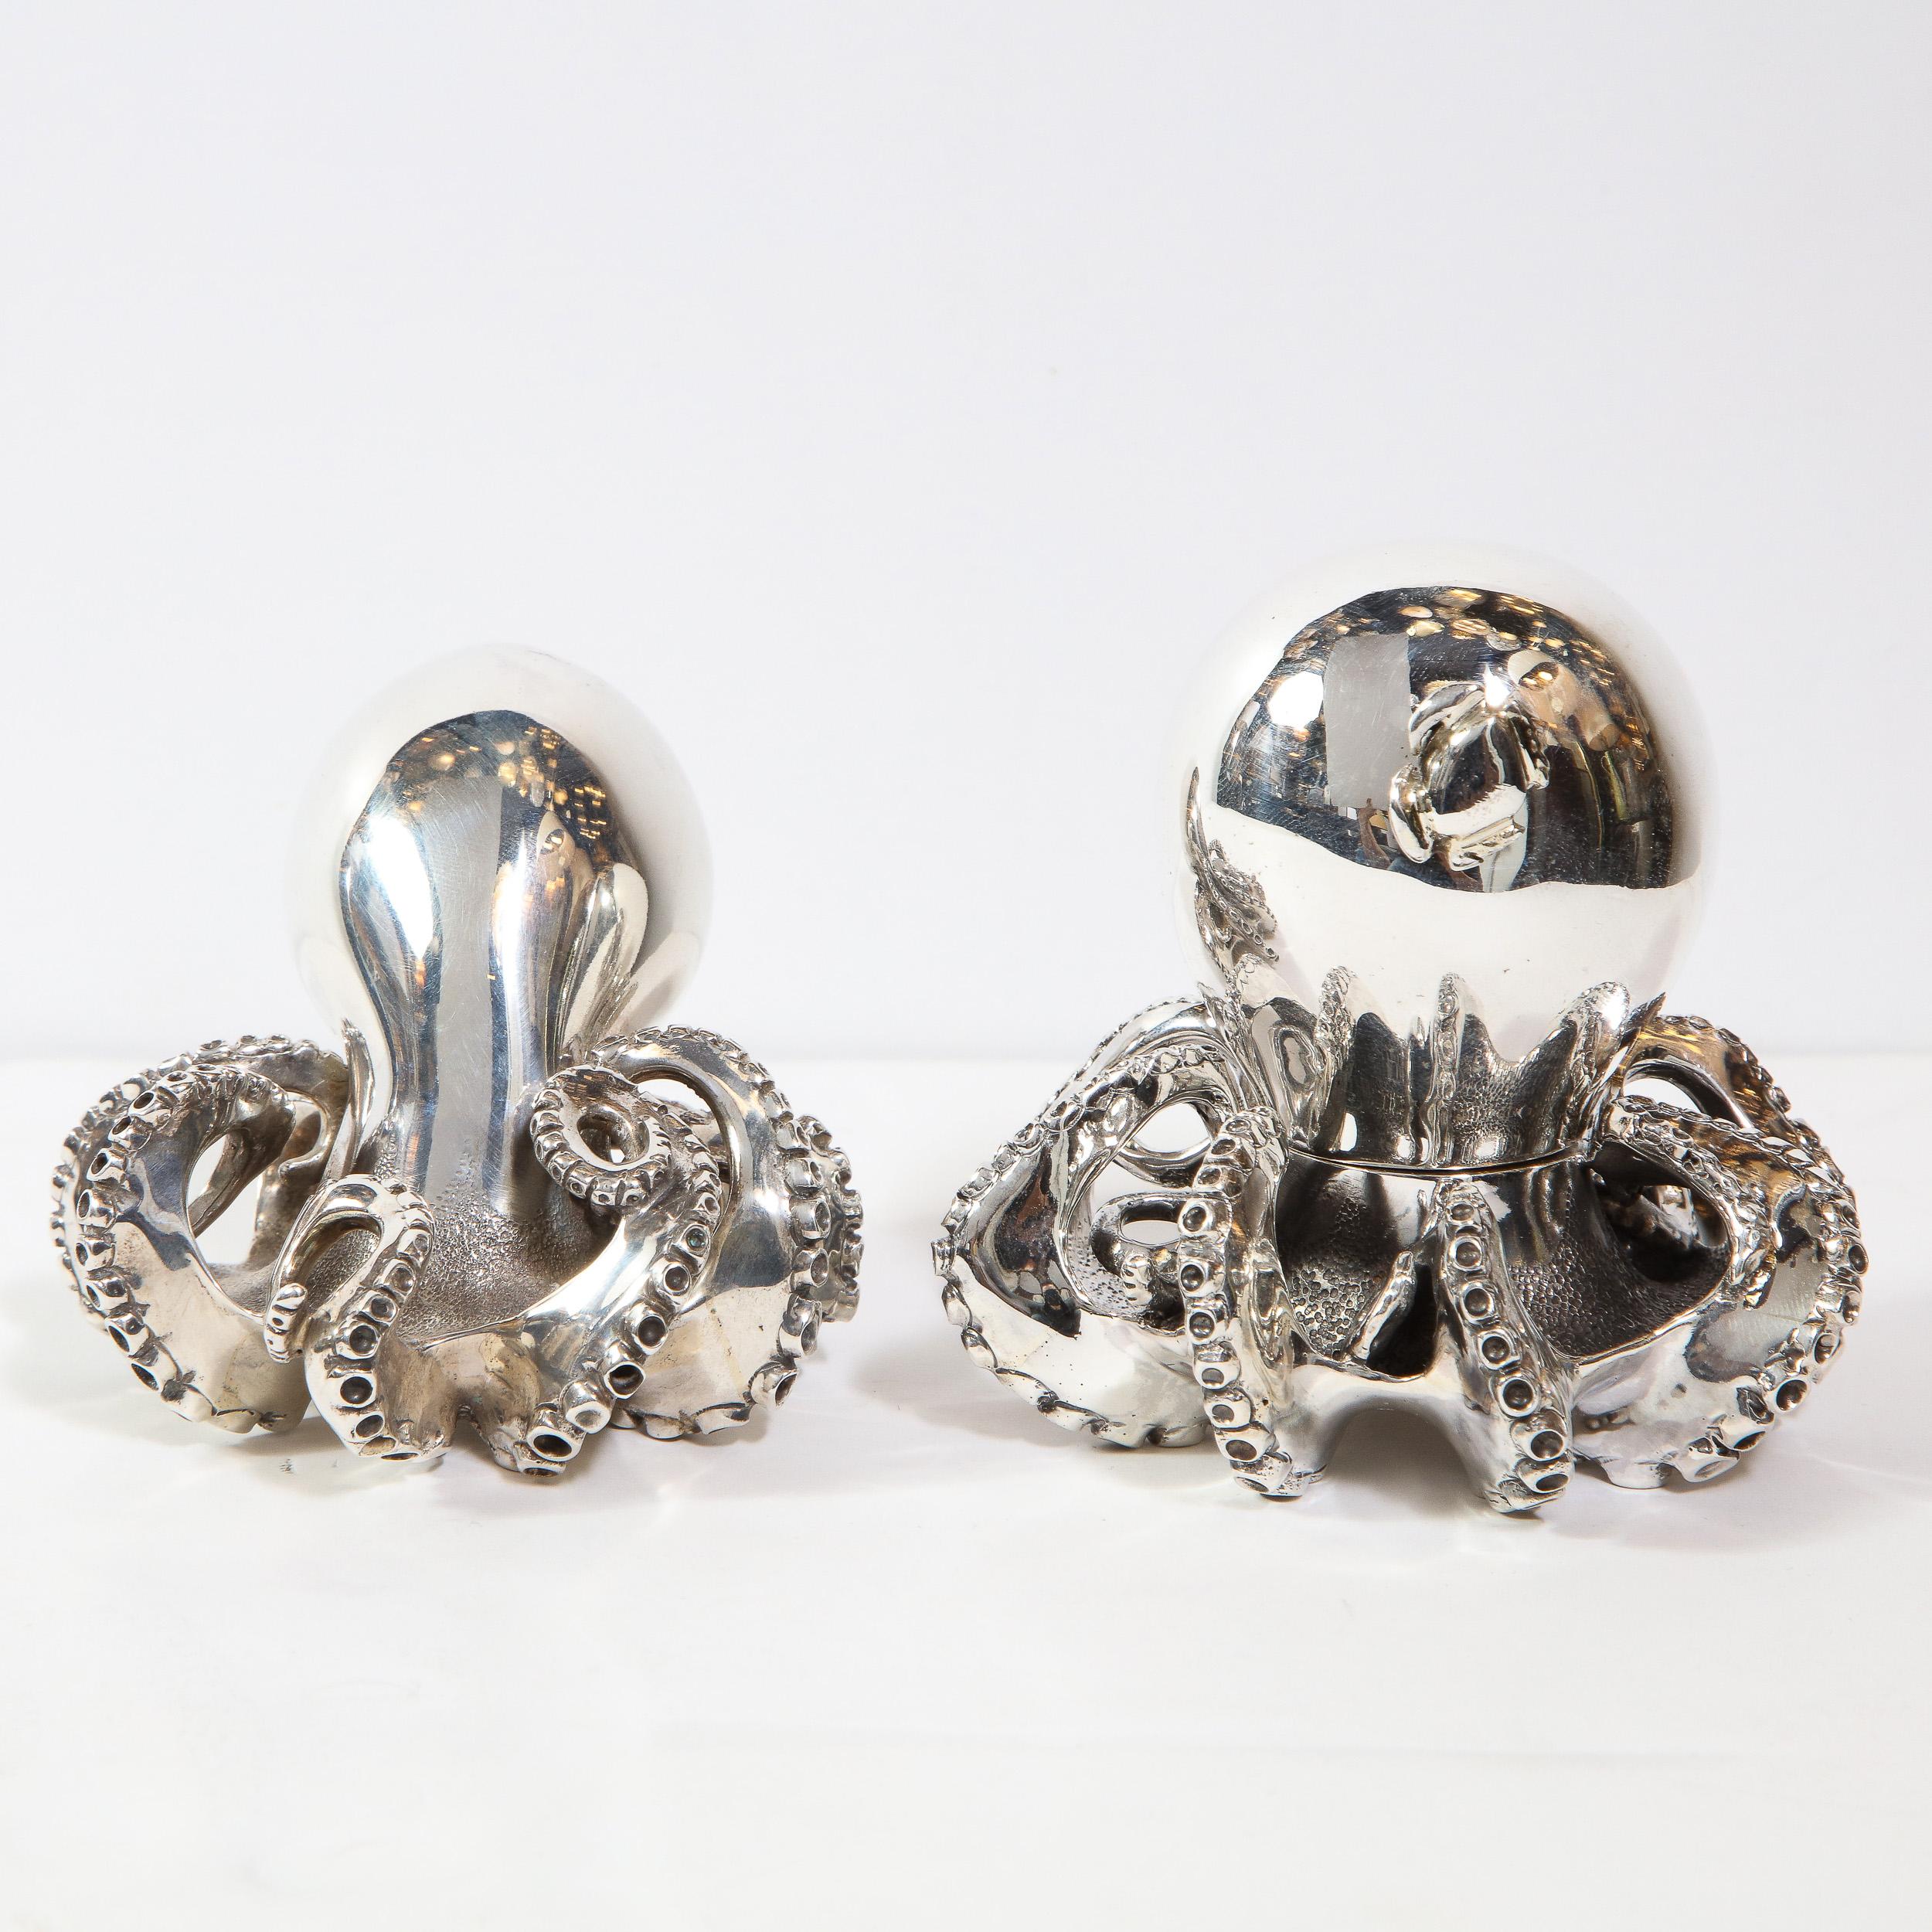 Handcrafted Sterling Silver Octopus Salt Shaker and Pepper Mill by Missiaglia 5